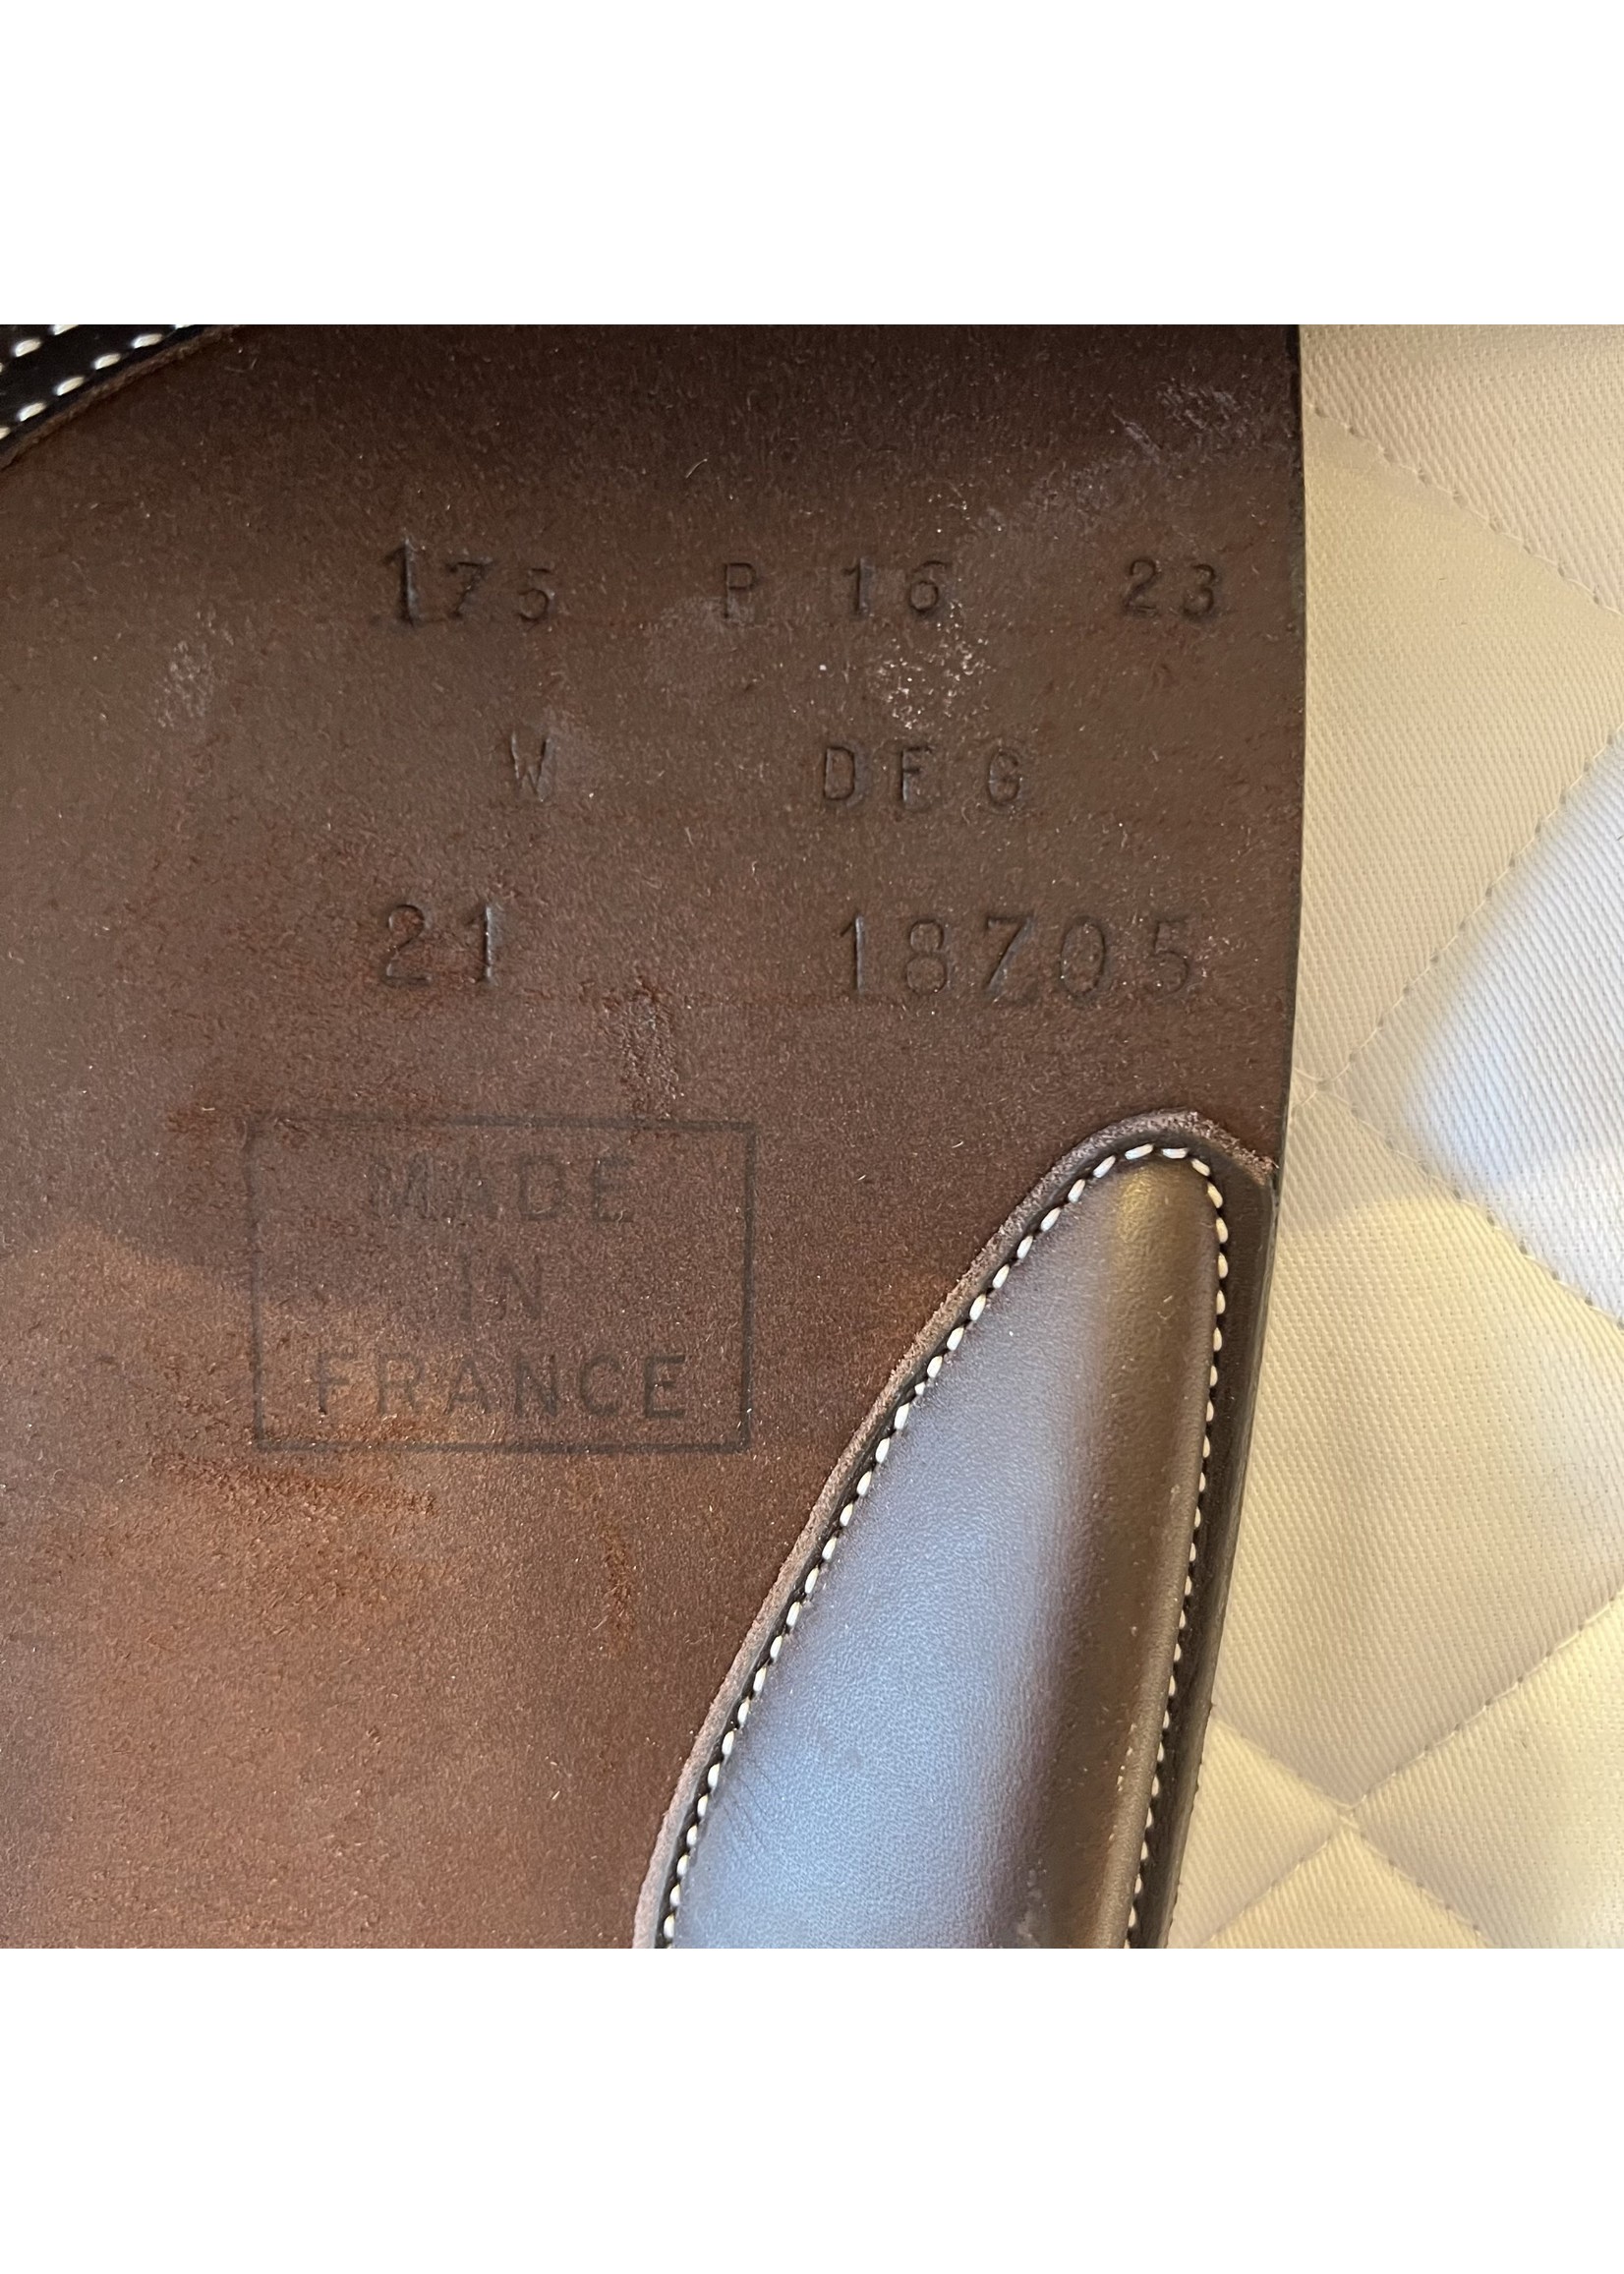 Woman lists Louis Vuitton bag for sale on Carousell, ends up